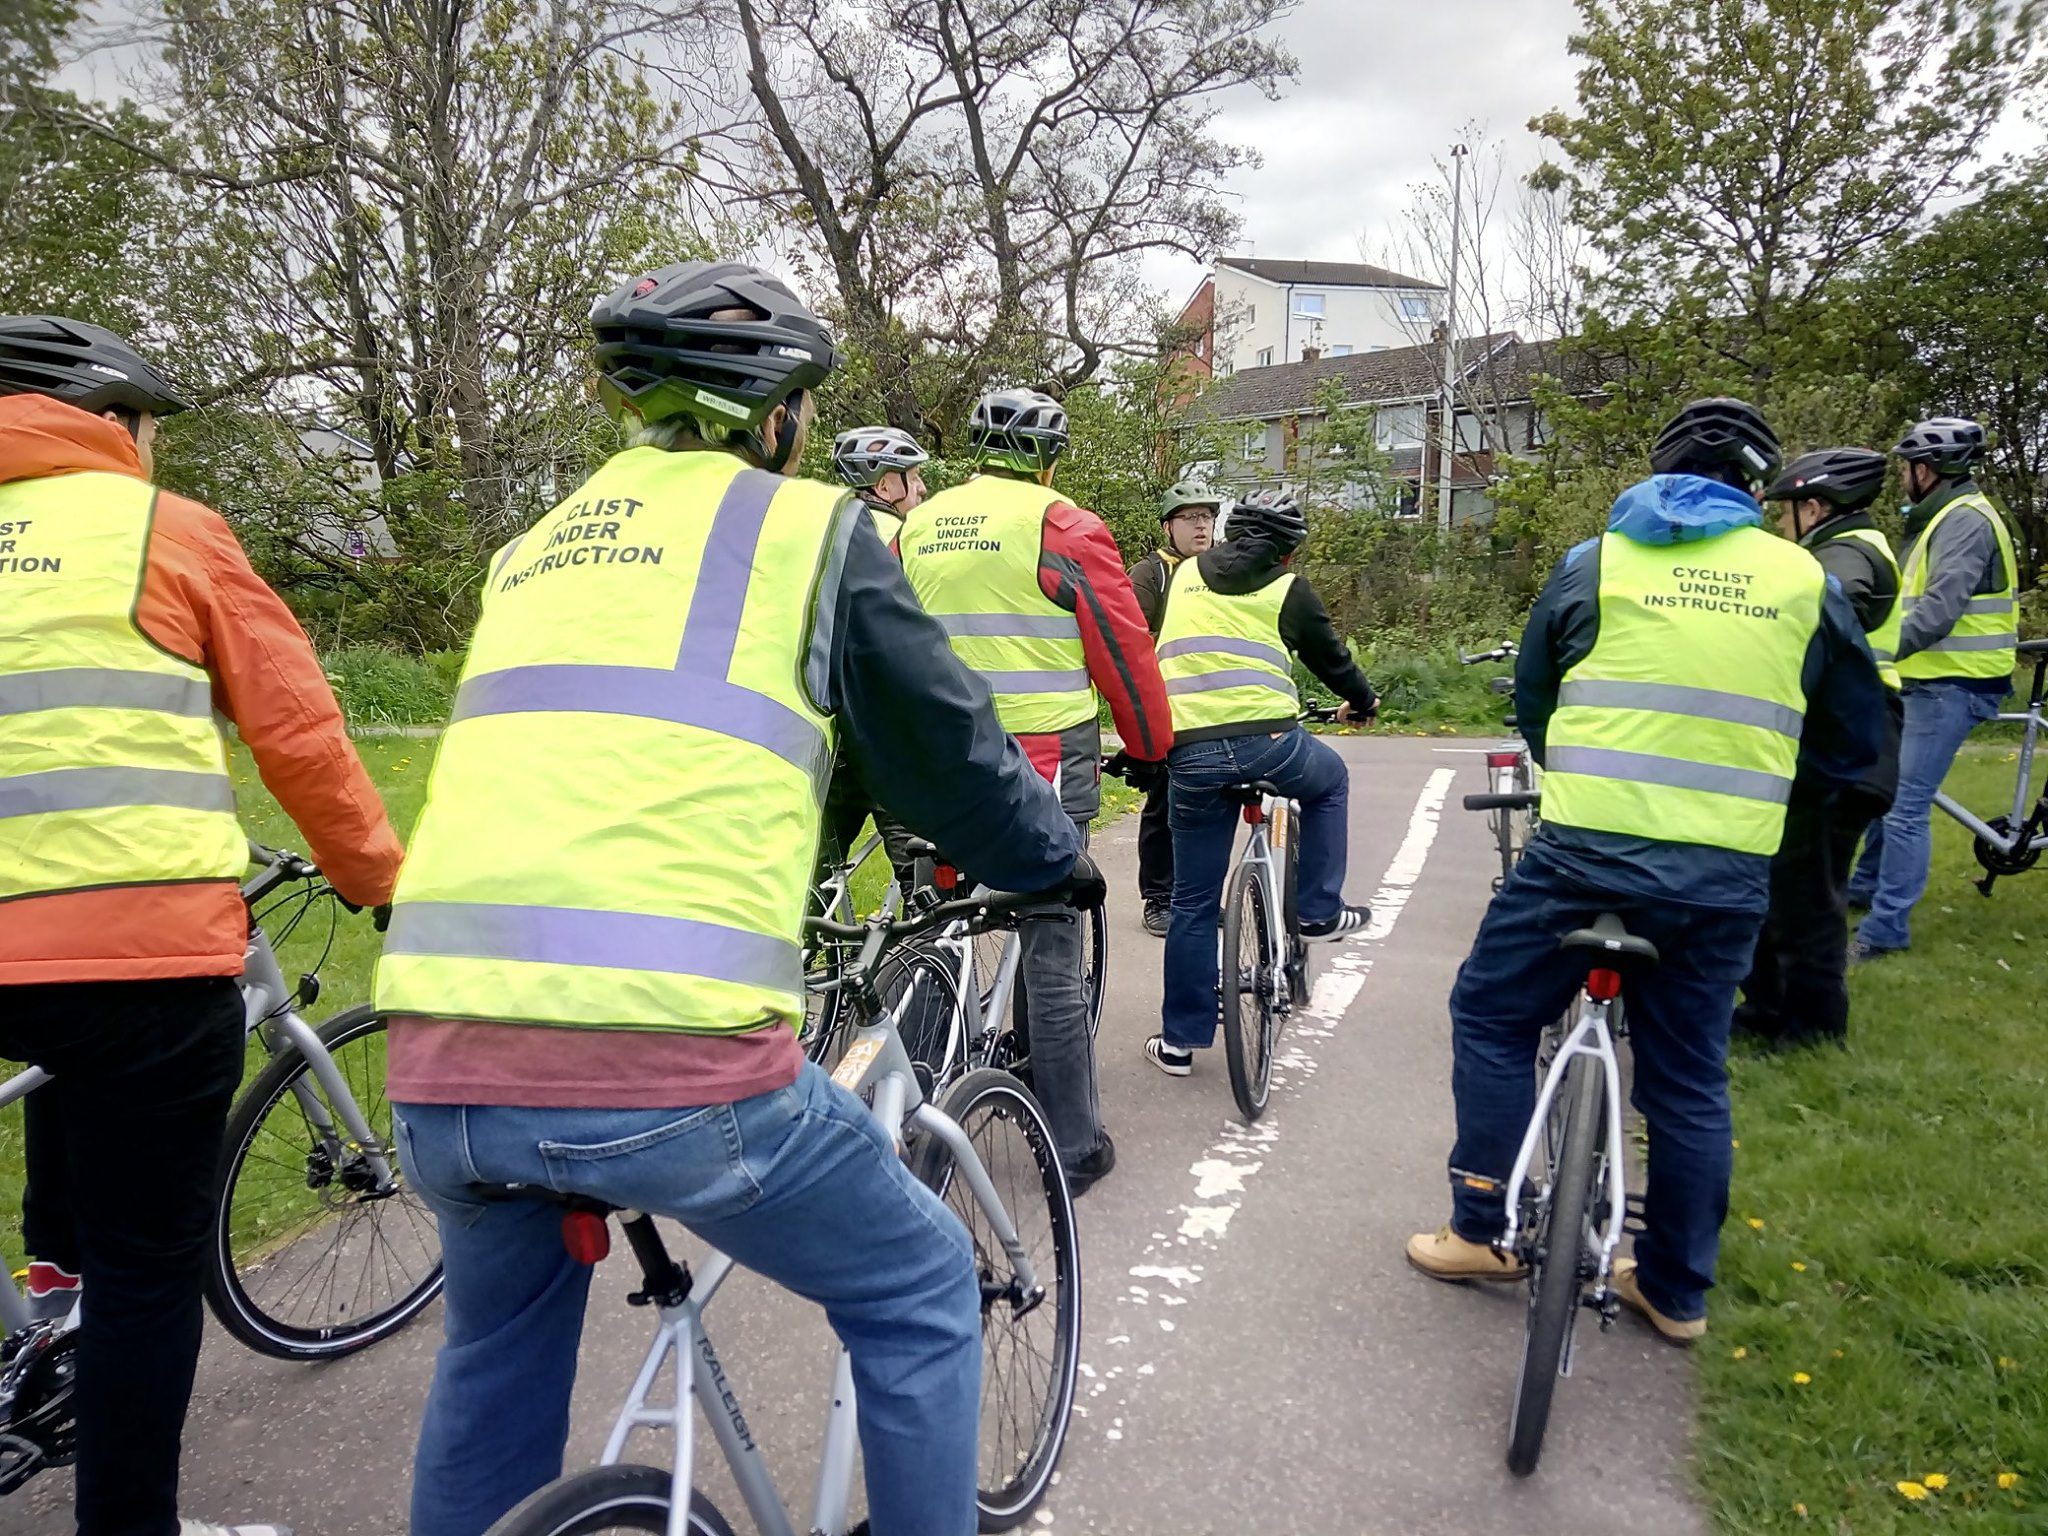 A group of people are mounted on bicycles facing away from the camera outdoors on a bike path. They each are wearing bicycle helmets and hi vis jackets with cyclist under instruction printed on the back.